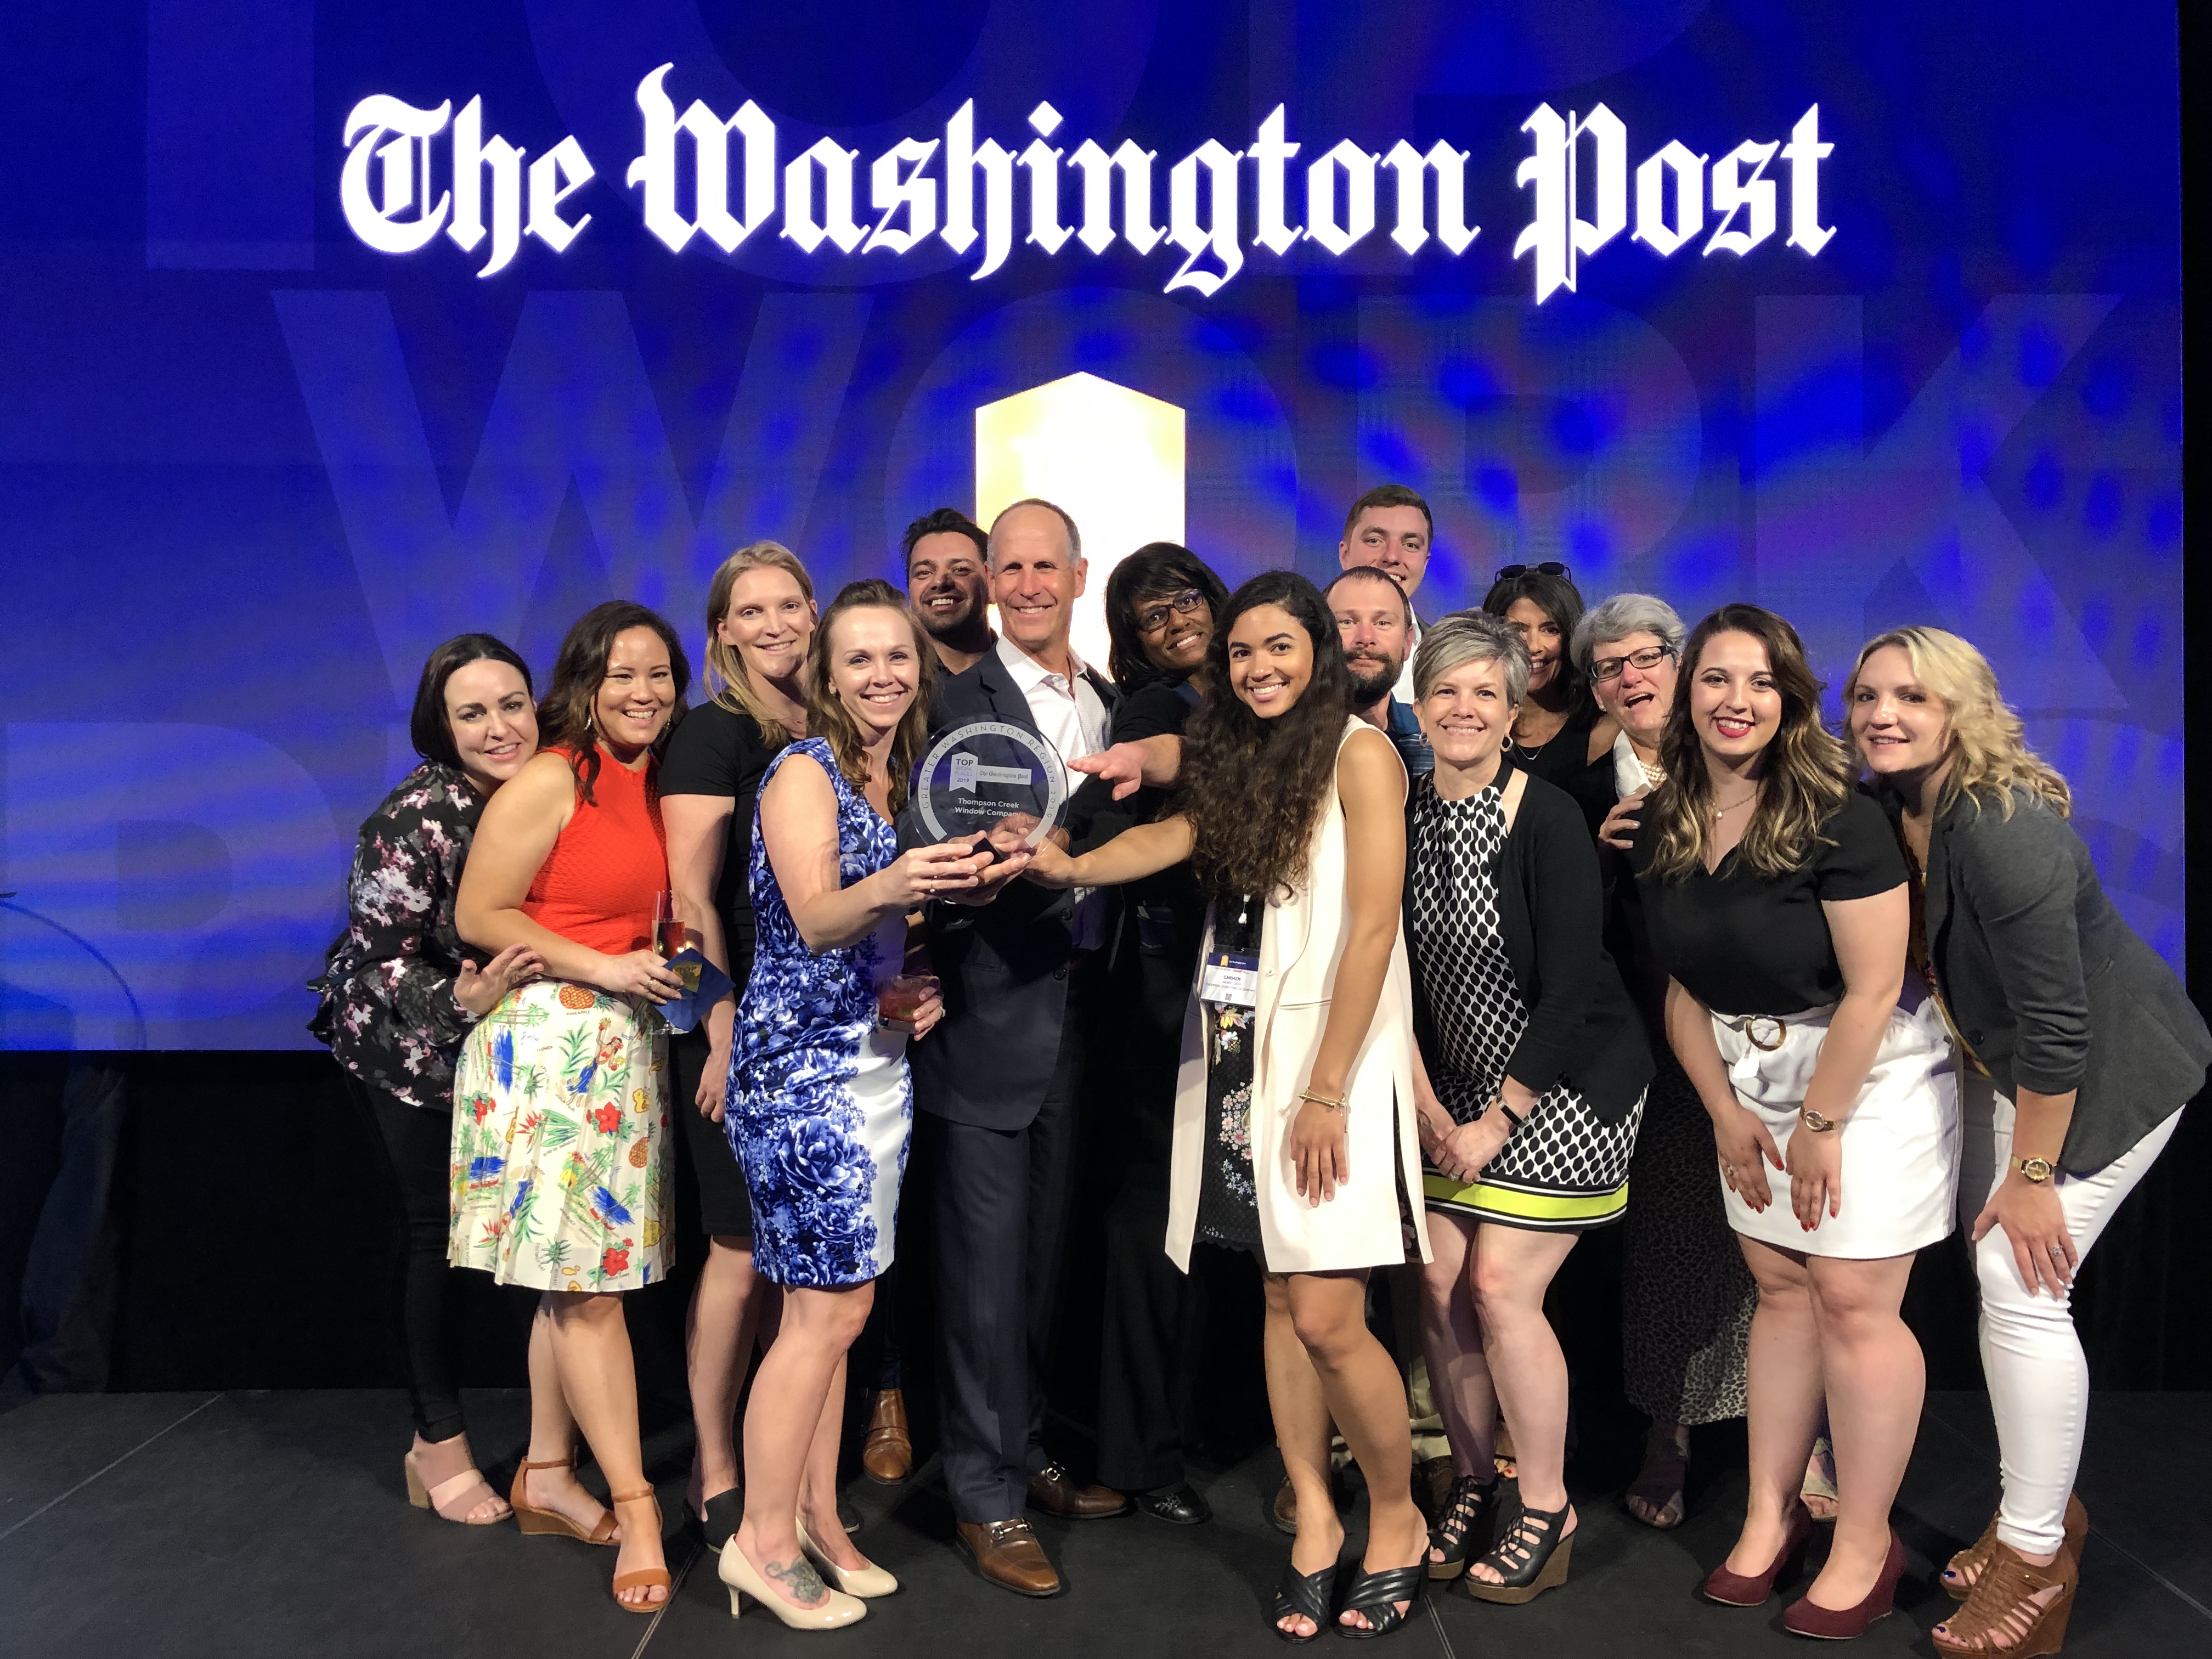 Thompson Creek employees flank CEO and President Rick Wuest in this photo from The Washington Post's 2019 celebration of Top Workplaces. 